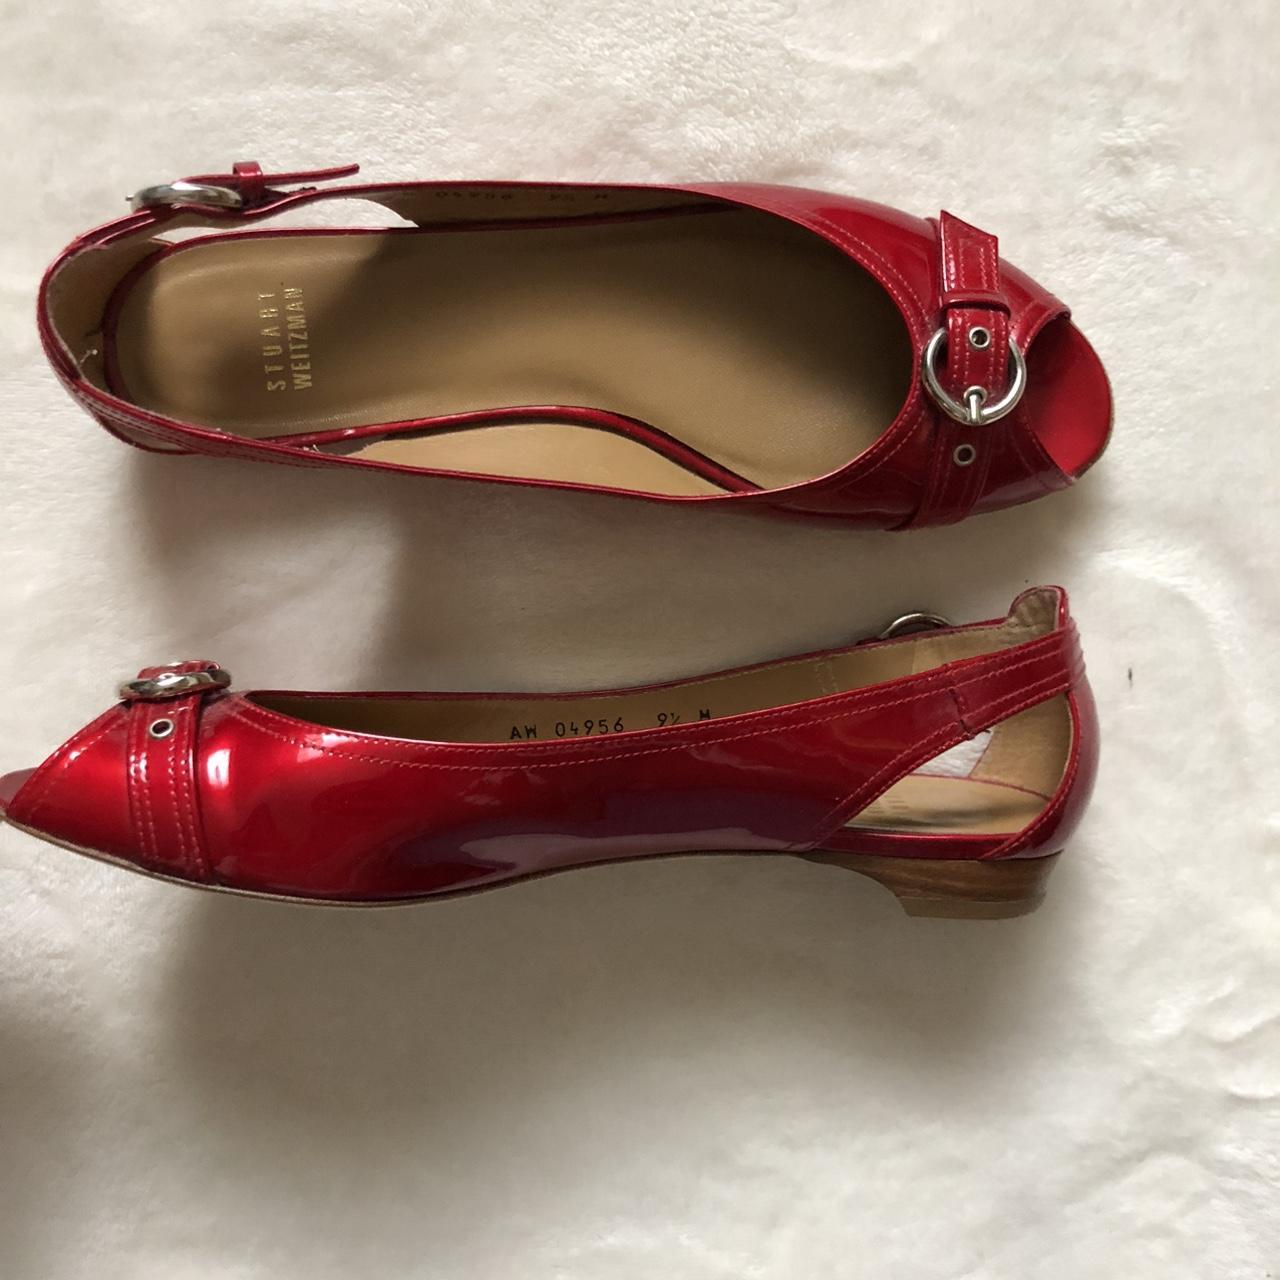 Stuart Weitzman Women's Red and Silver Ballet-shoes (3)